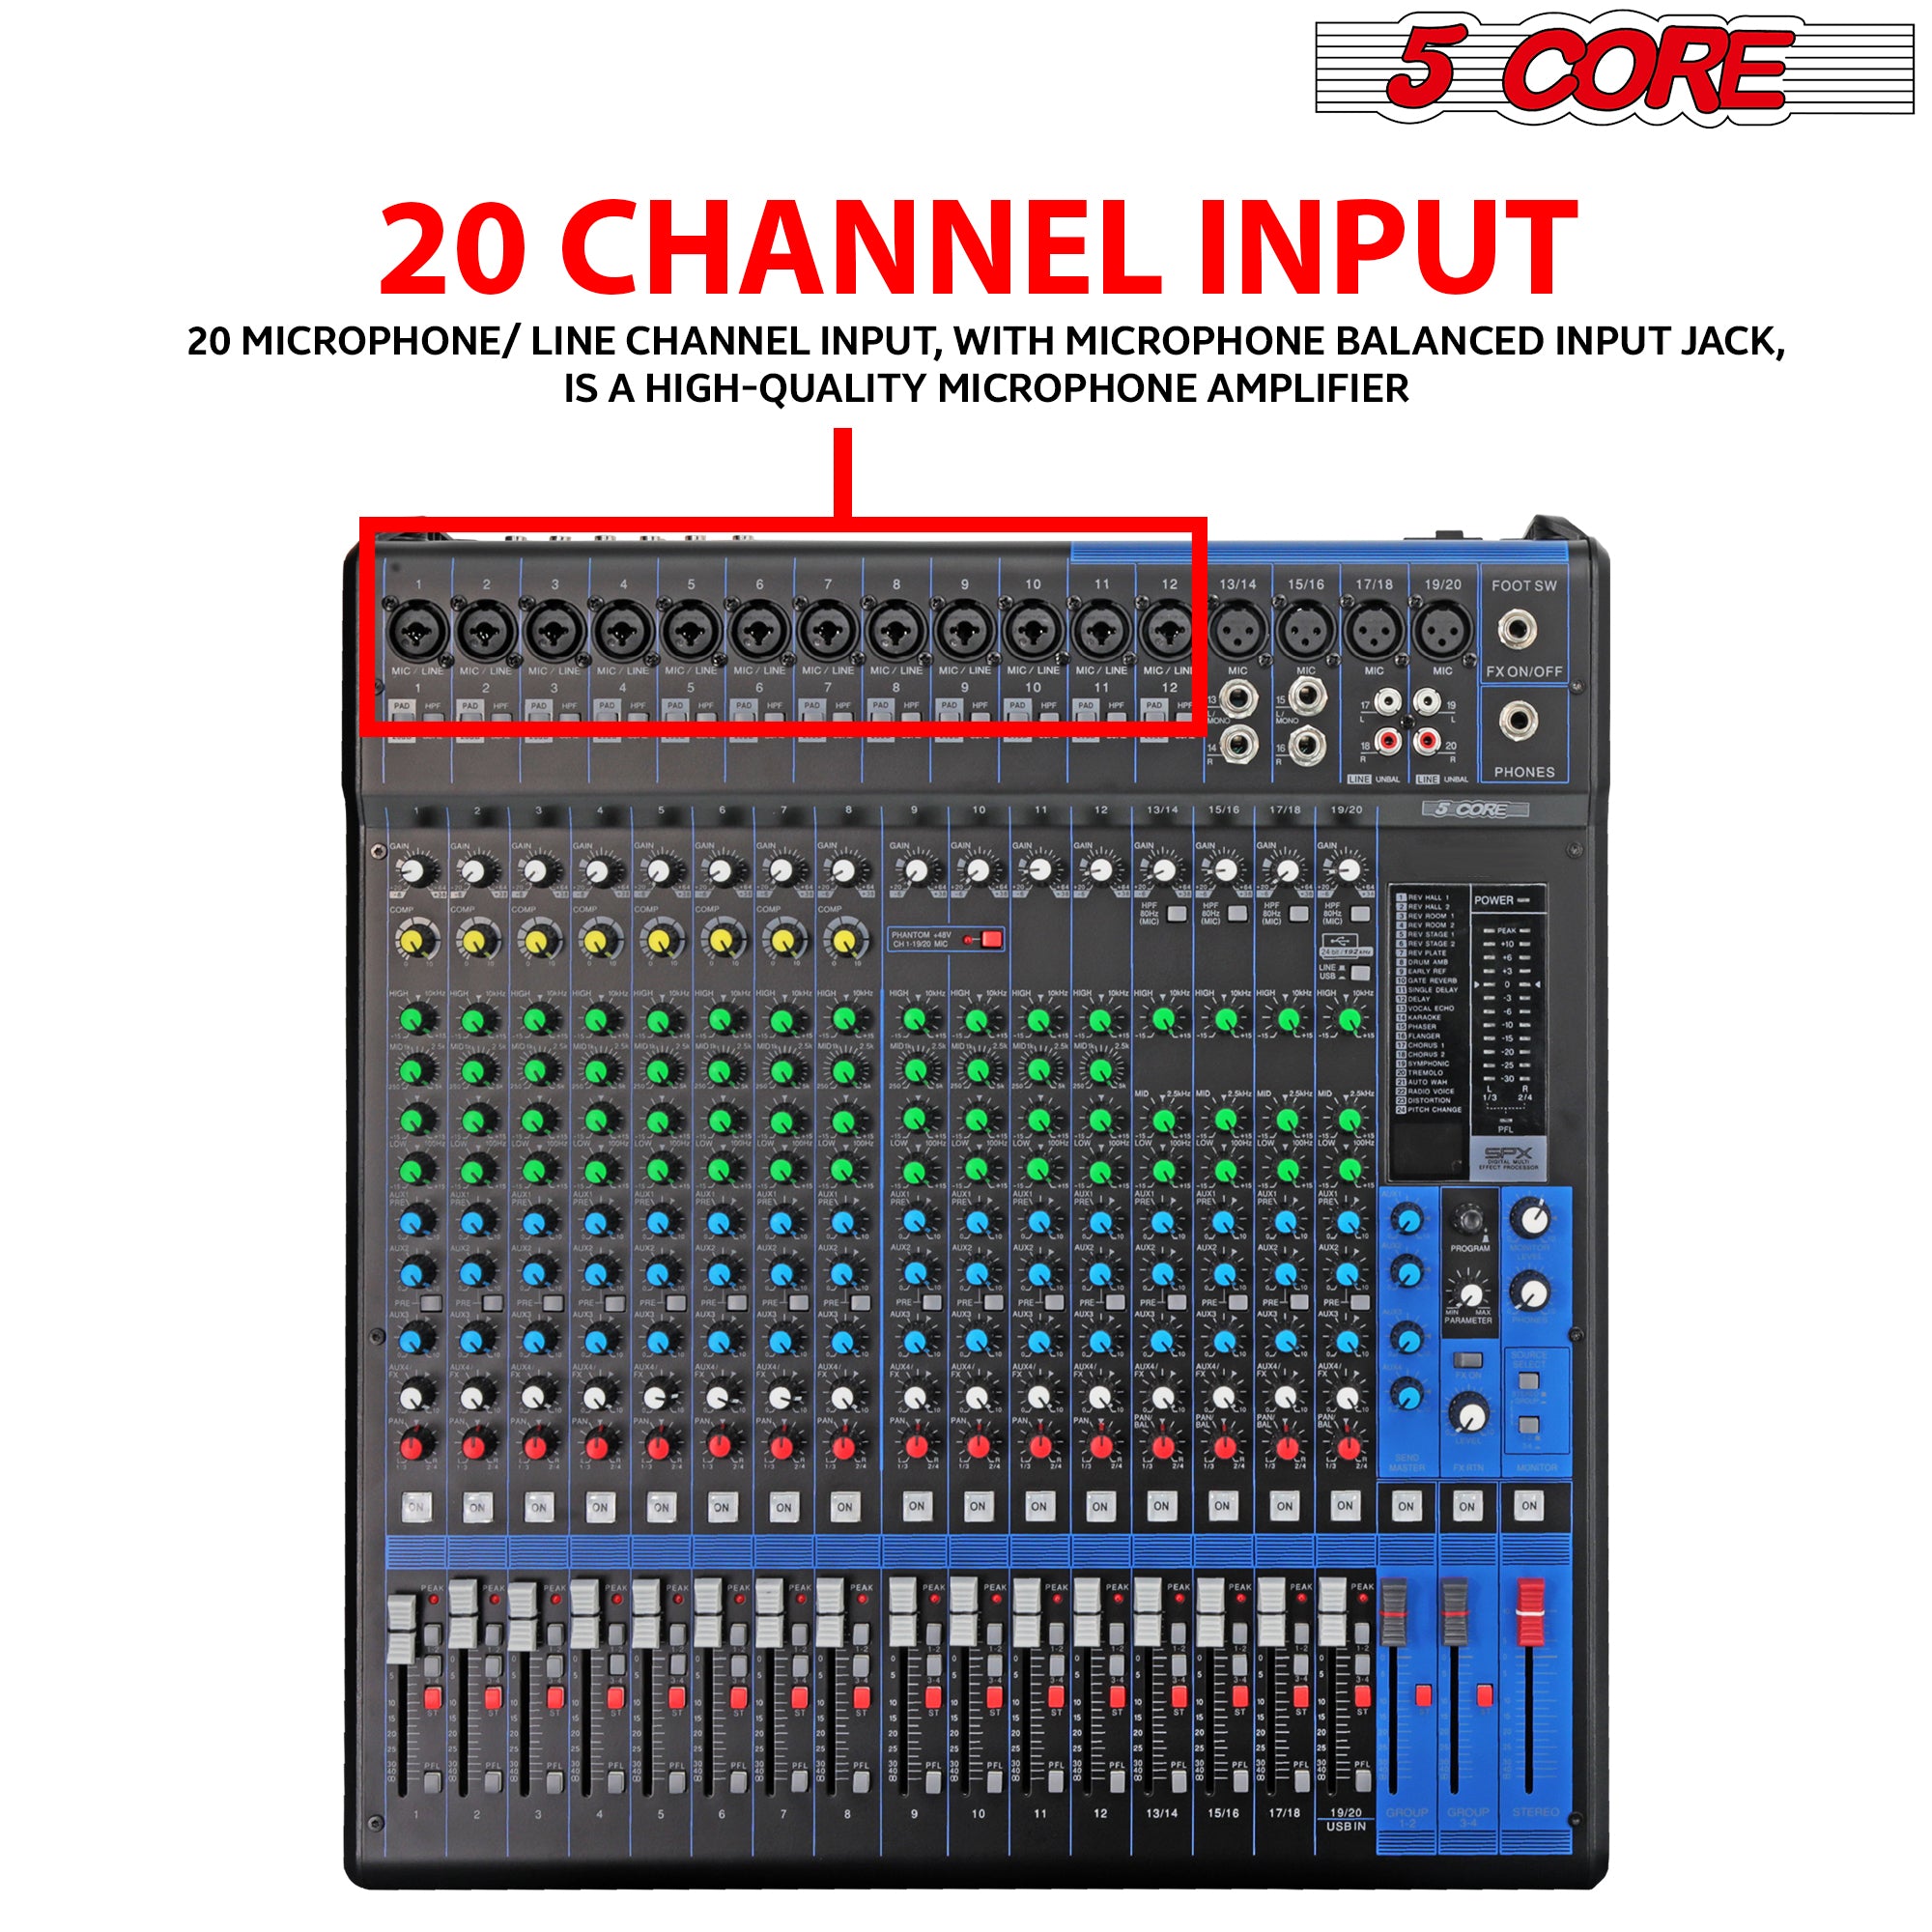 20 channel input